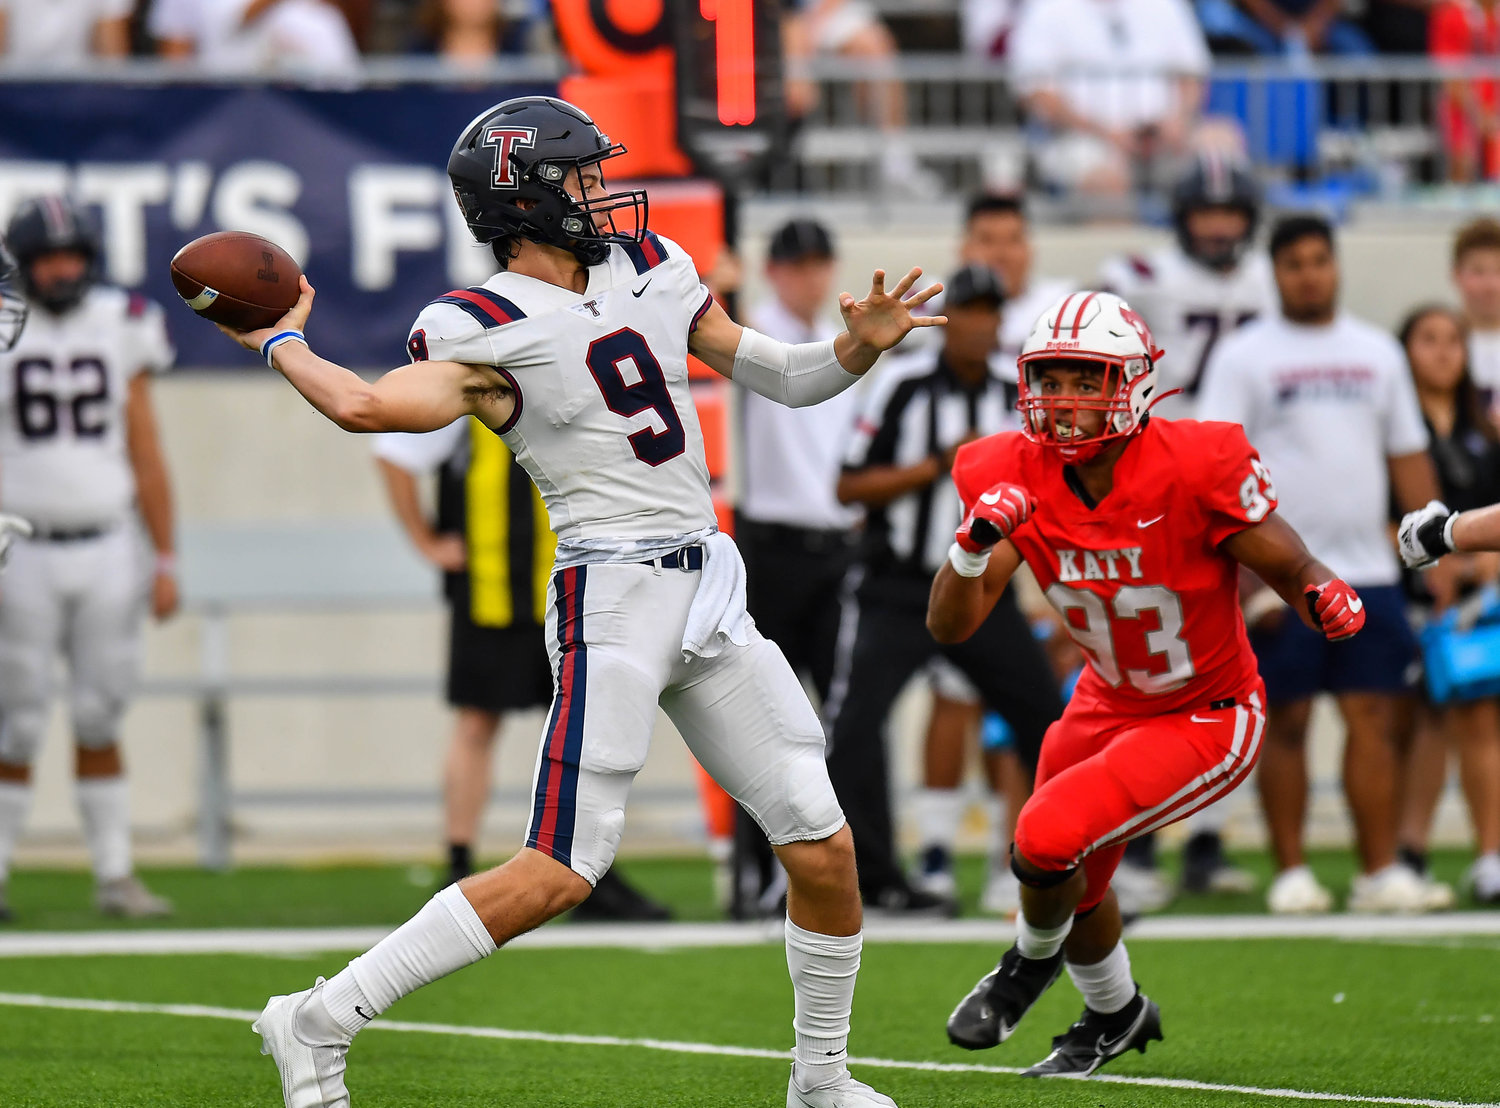 Katy, Tx. Oct. 1, 2021: Tompkins QB #9 Cole Francis delivers a pass for a TD during a game between Katy Tigers and Tompkins Falcons at Legacy Stadium in Katy. (Photo by Mark Goodman / Katy Times)